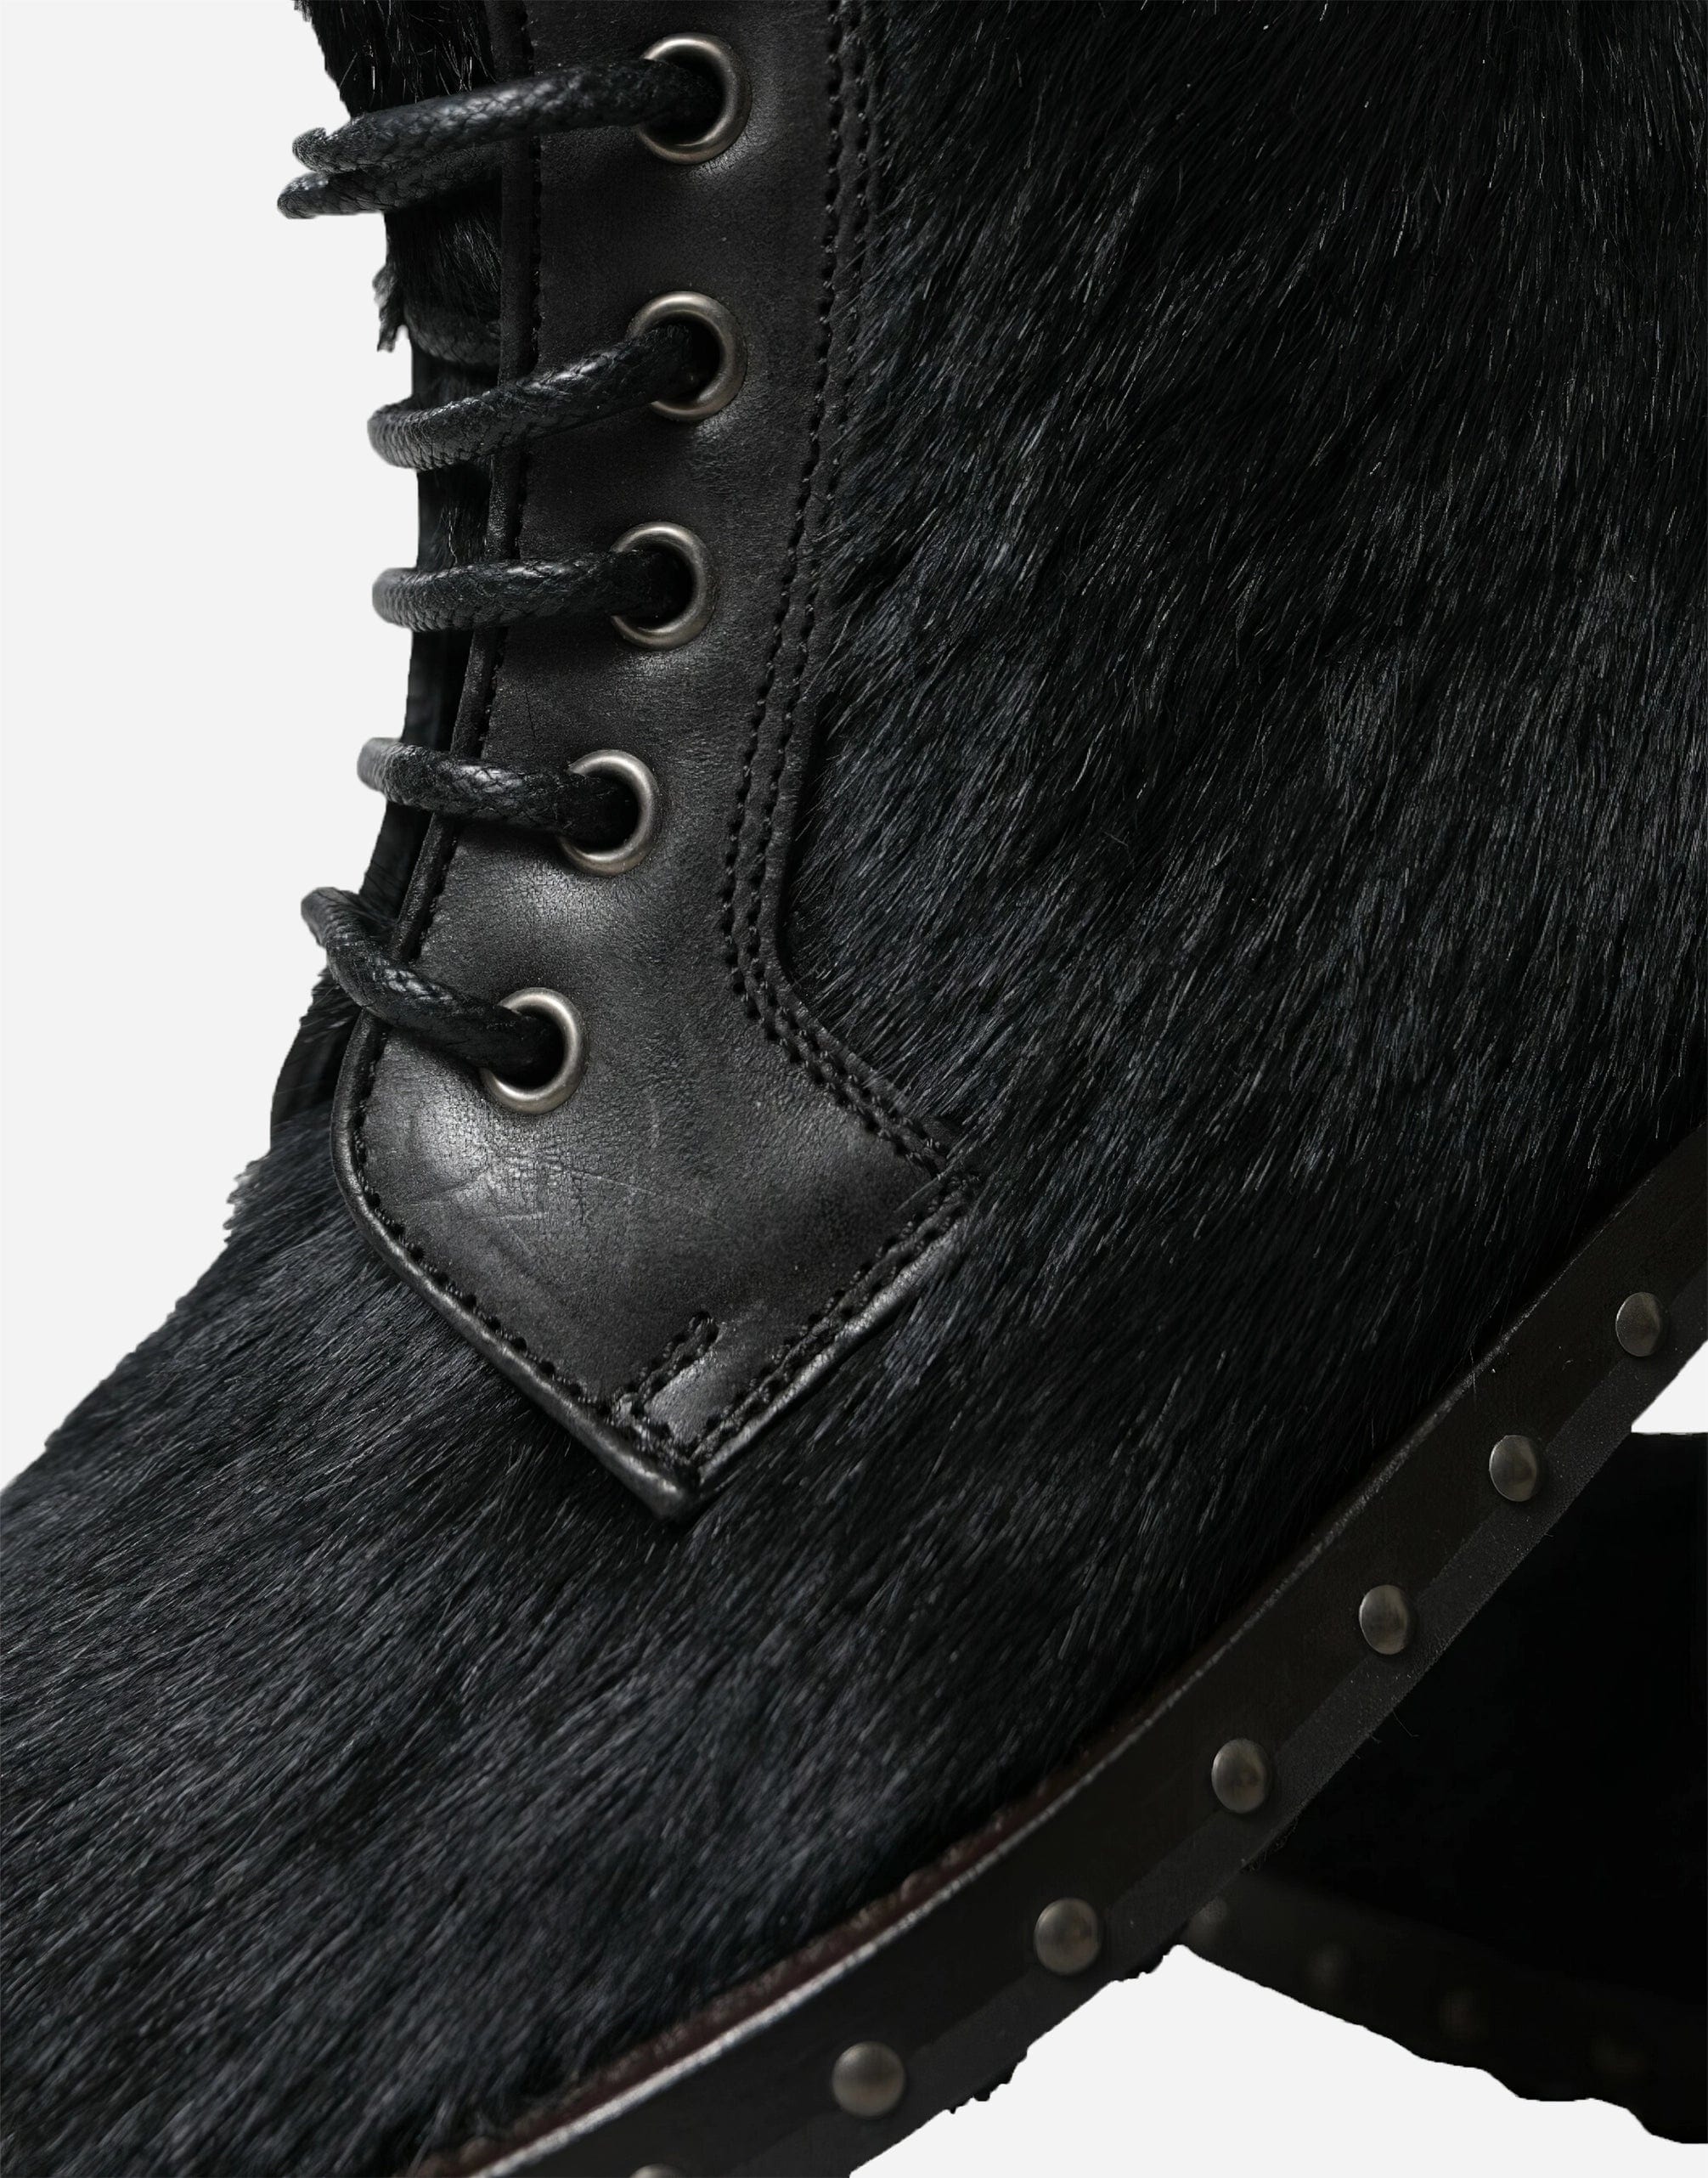 Dolce & Gabbana Pony-Style Leather Boots